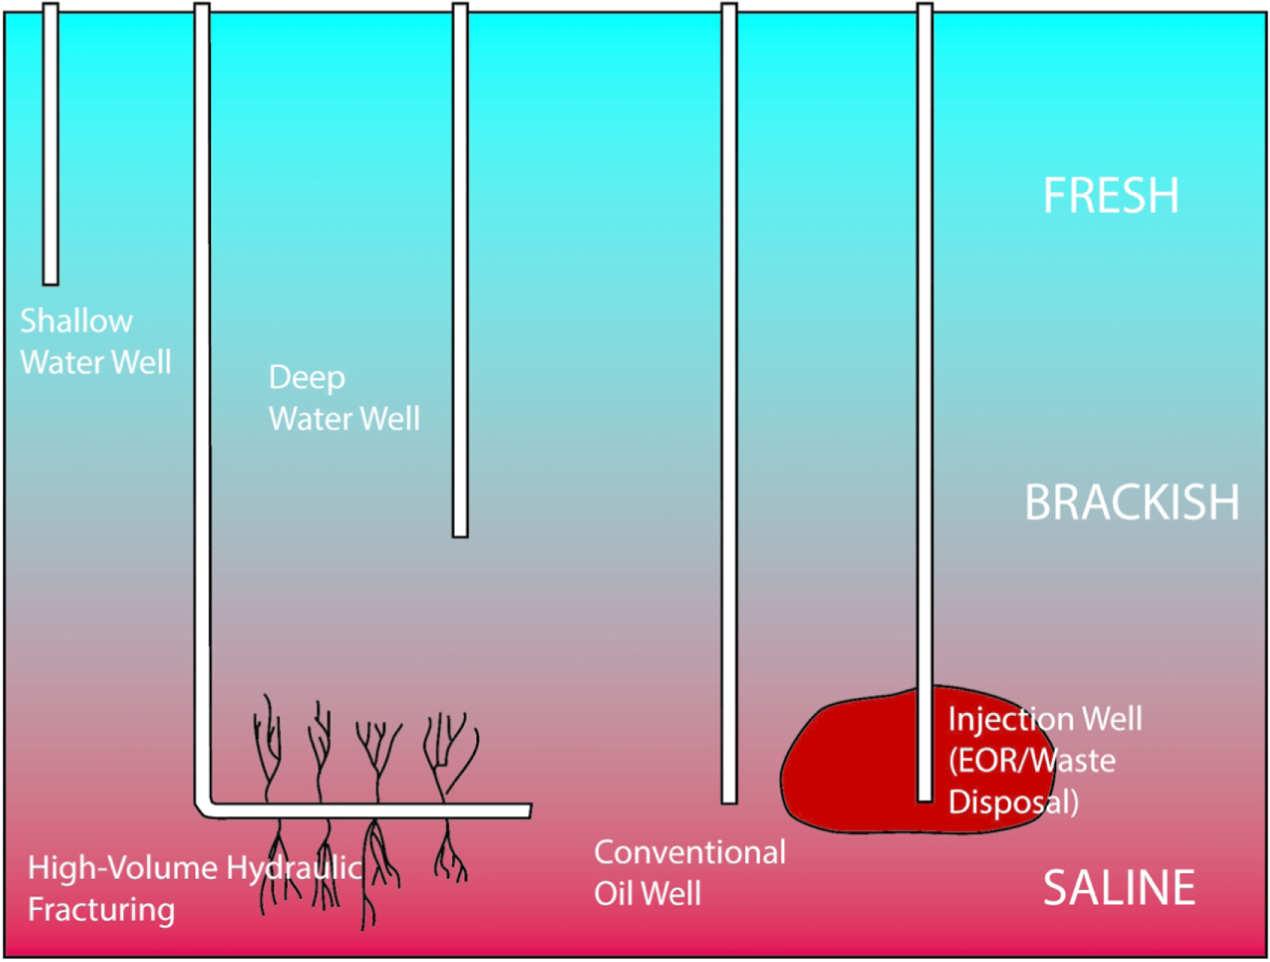 Graphic of injection wells